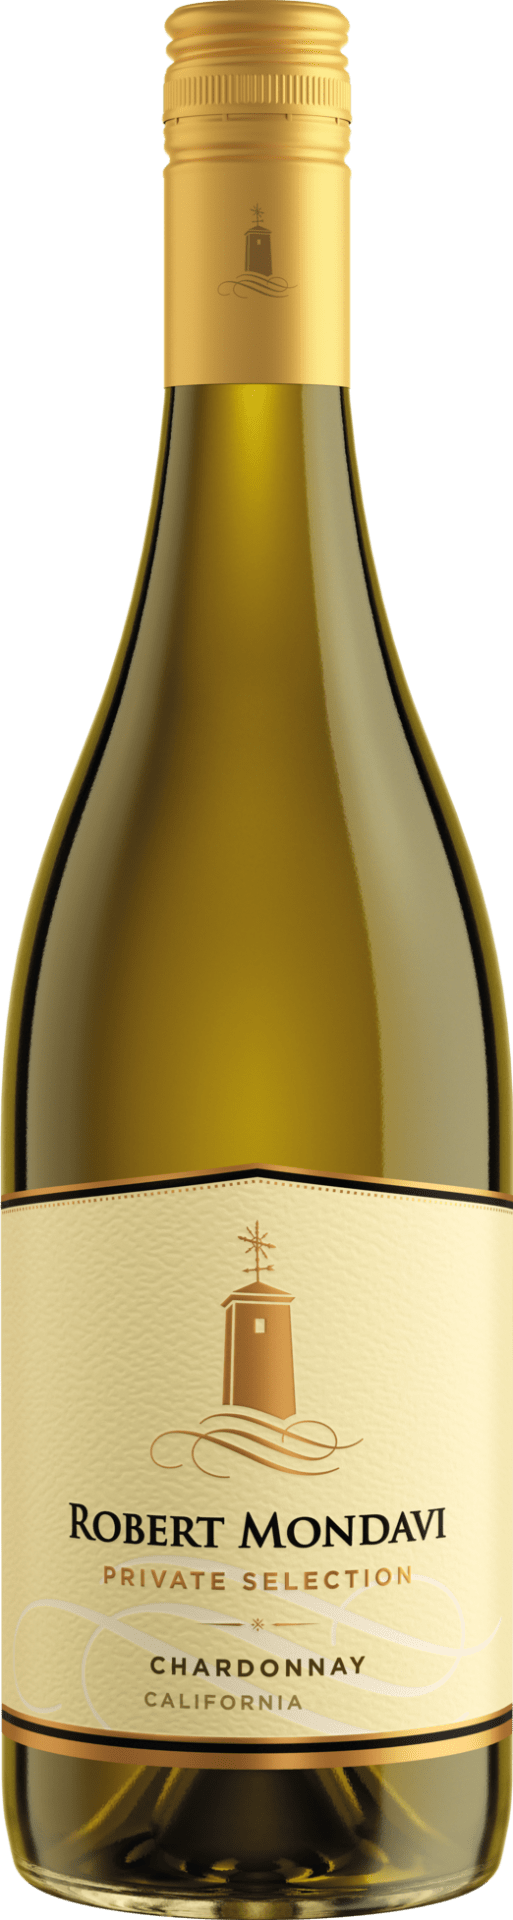 Private Selection Chardonnay